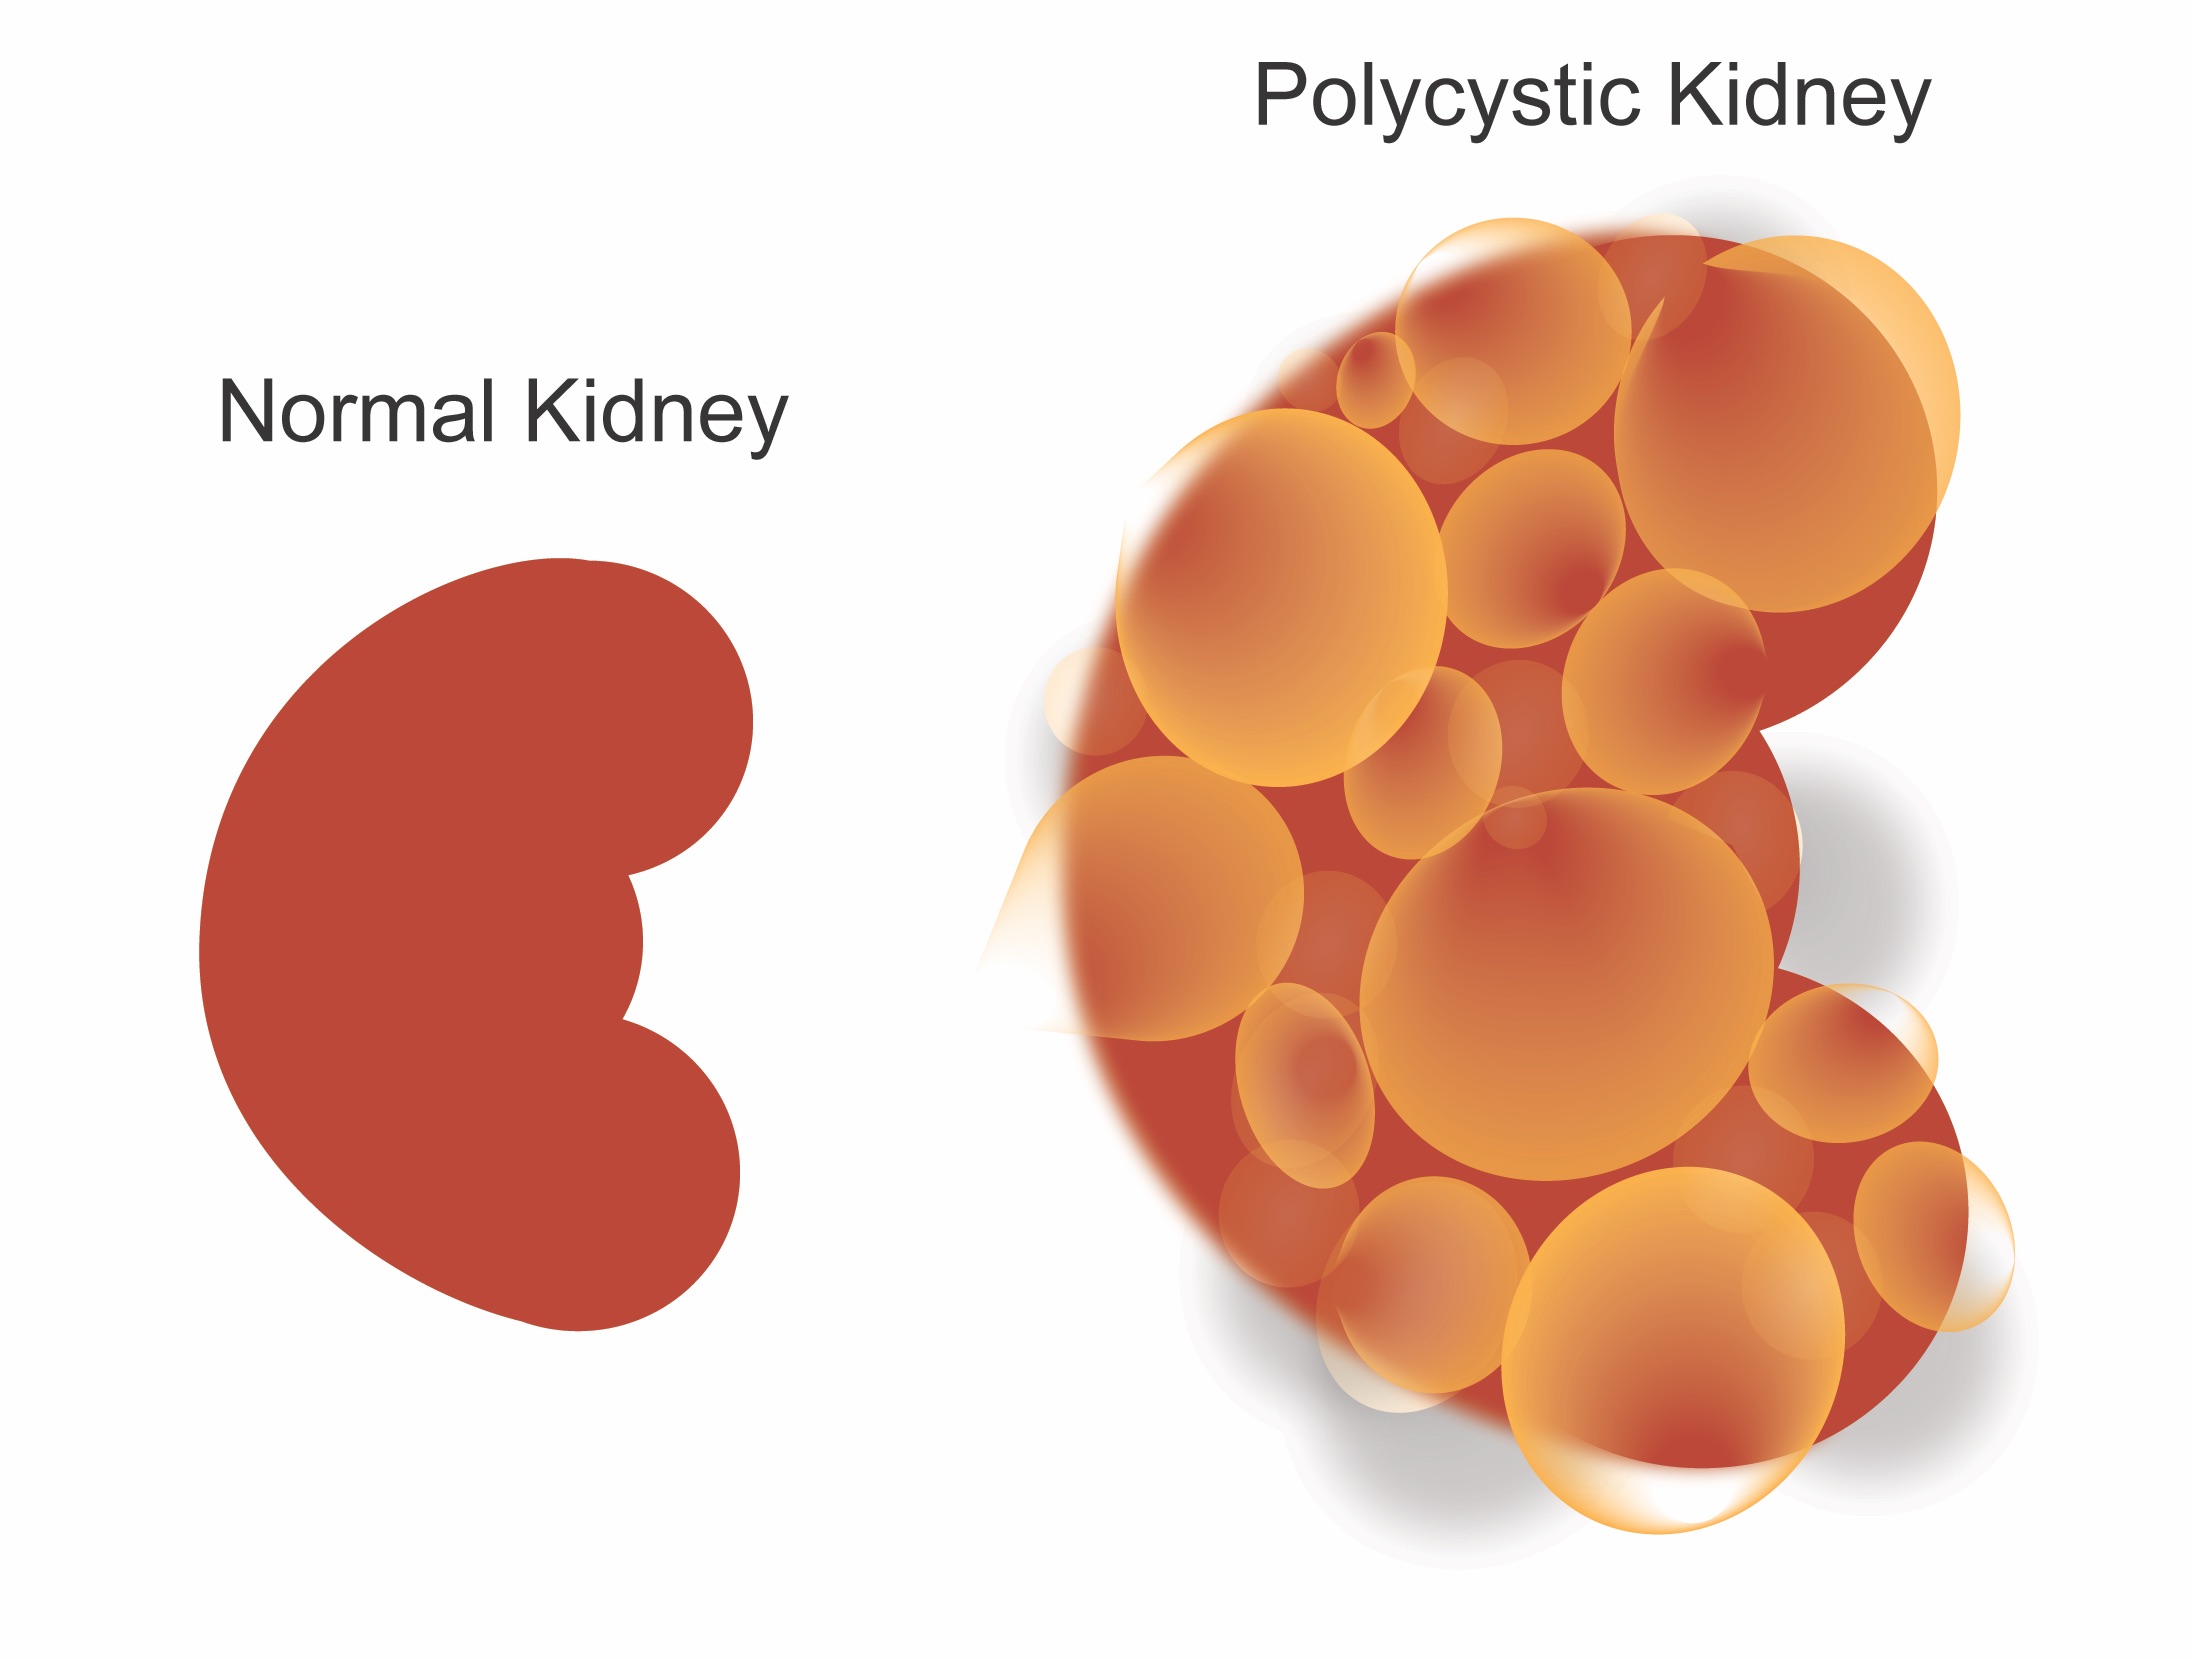 Illustration comparing a normal kidney and a PKD kidney